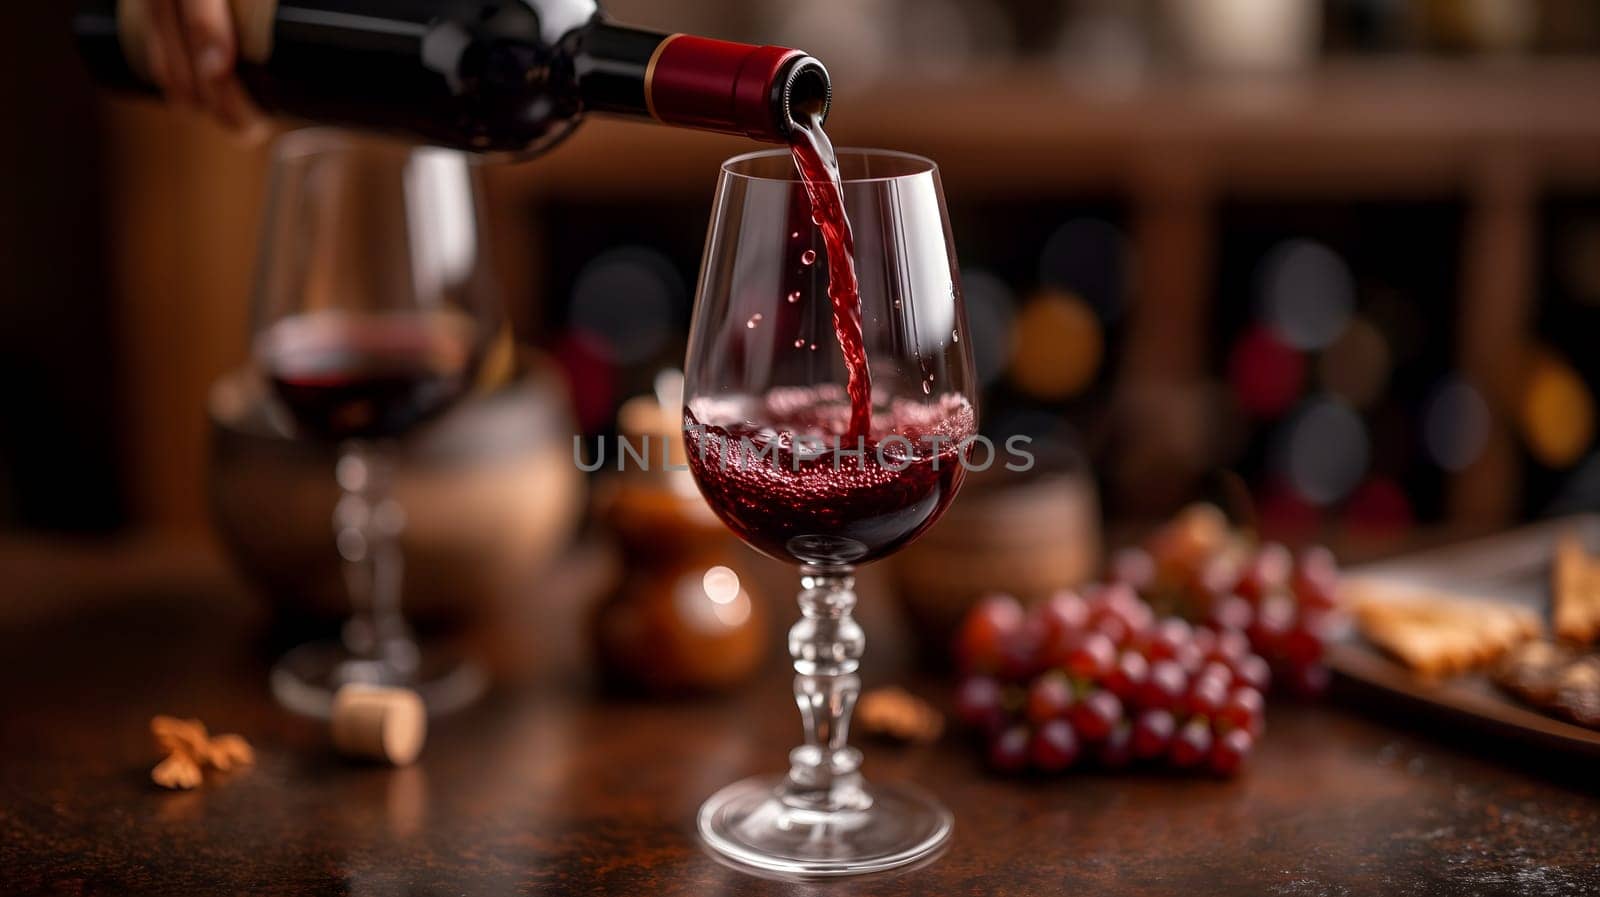 A wine bottle, with its elegant shape and deep red liquid inside, is being poured into a crystal glass, ready to be enjoyed during a romantic dinner. Neural network generated image. Not based on any actual scene or pattern.